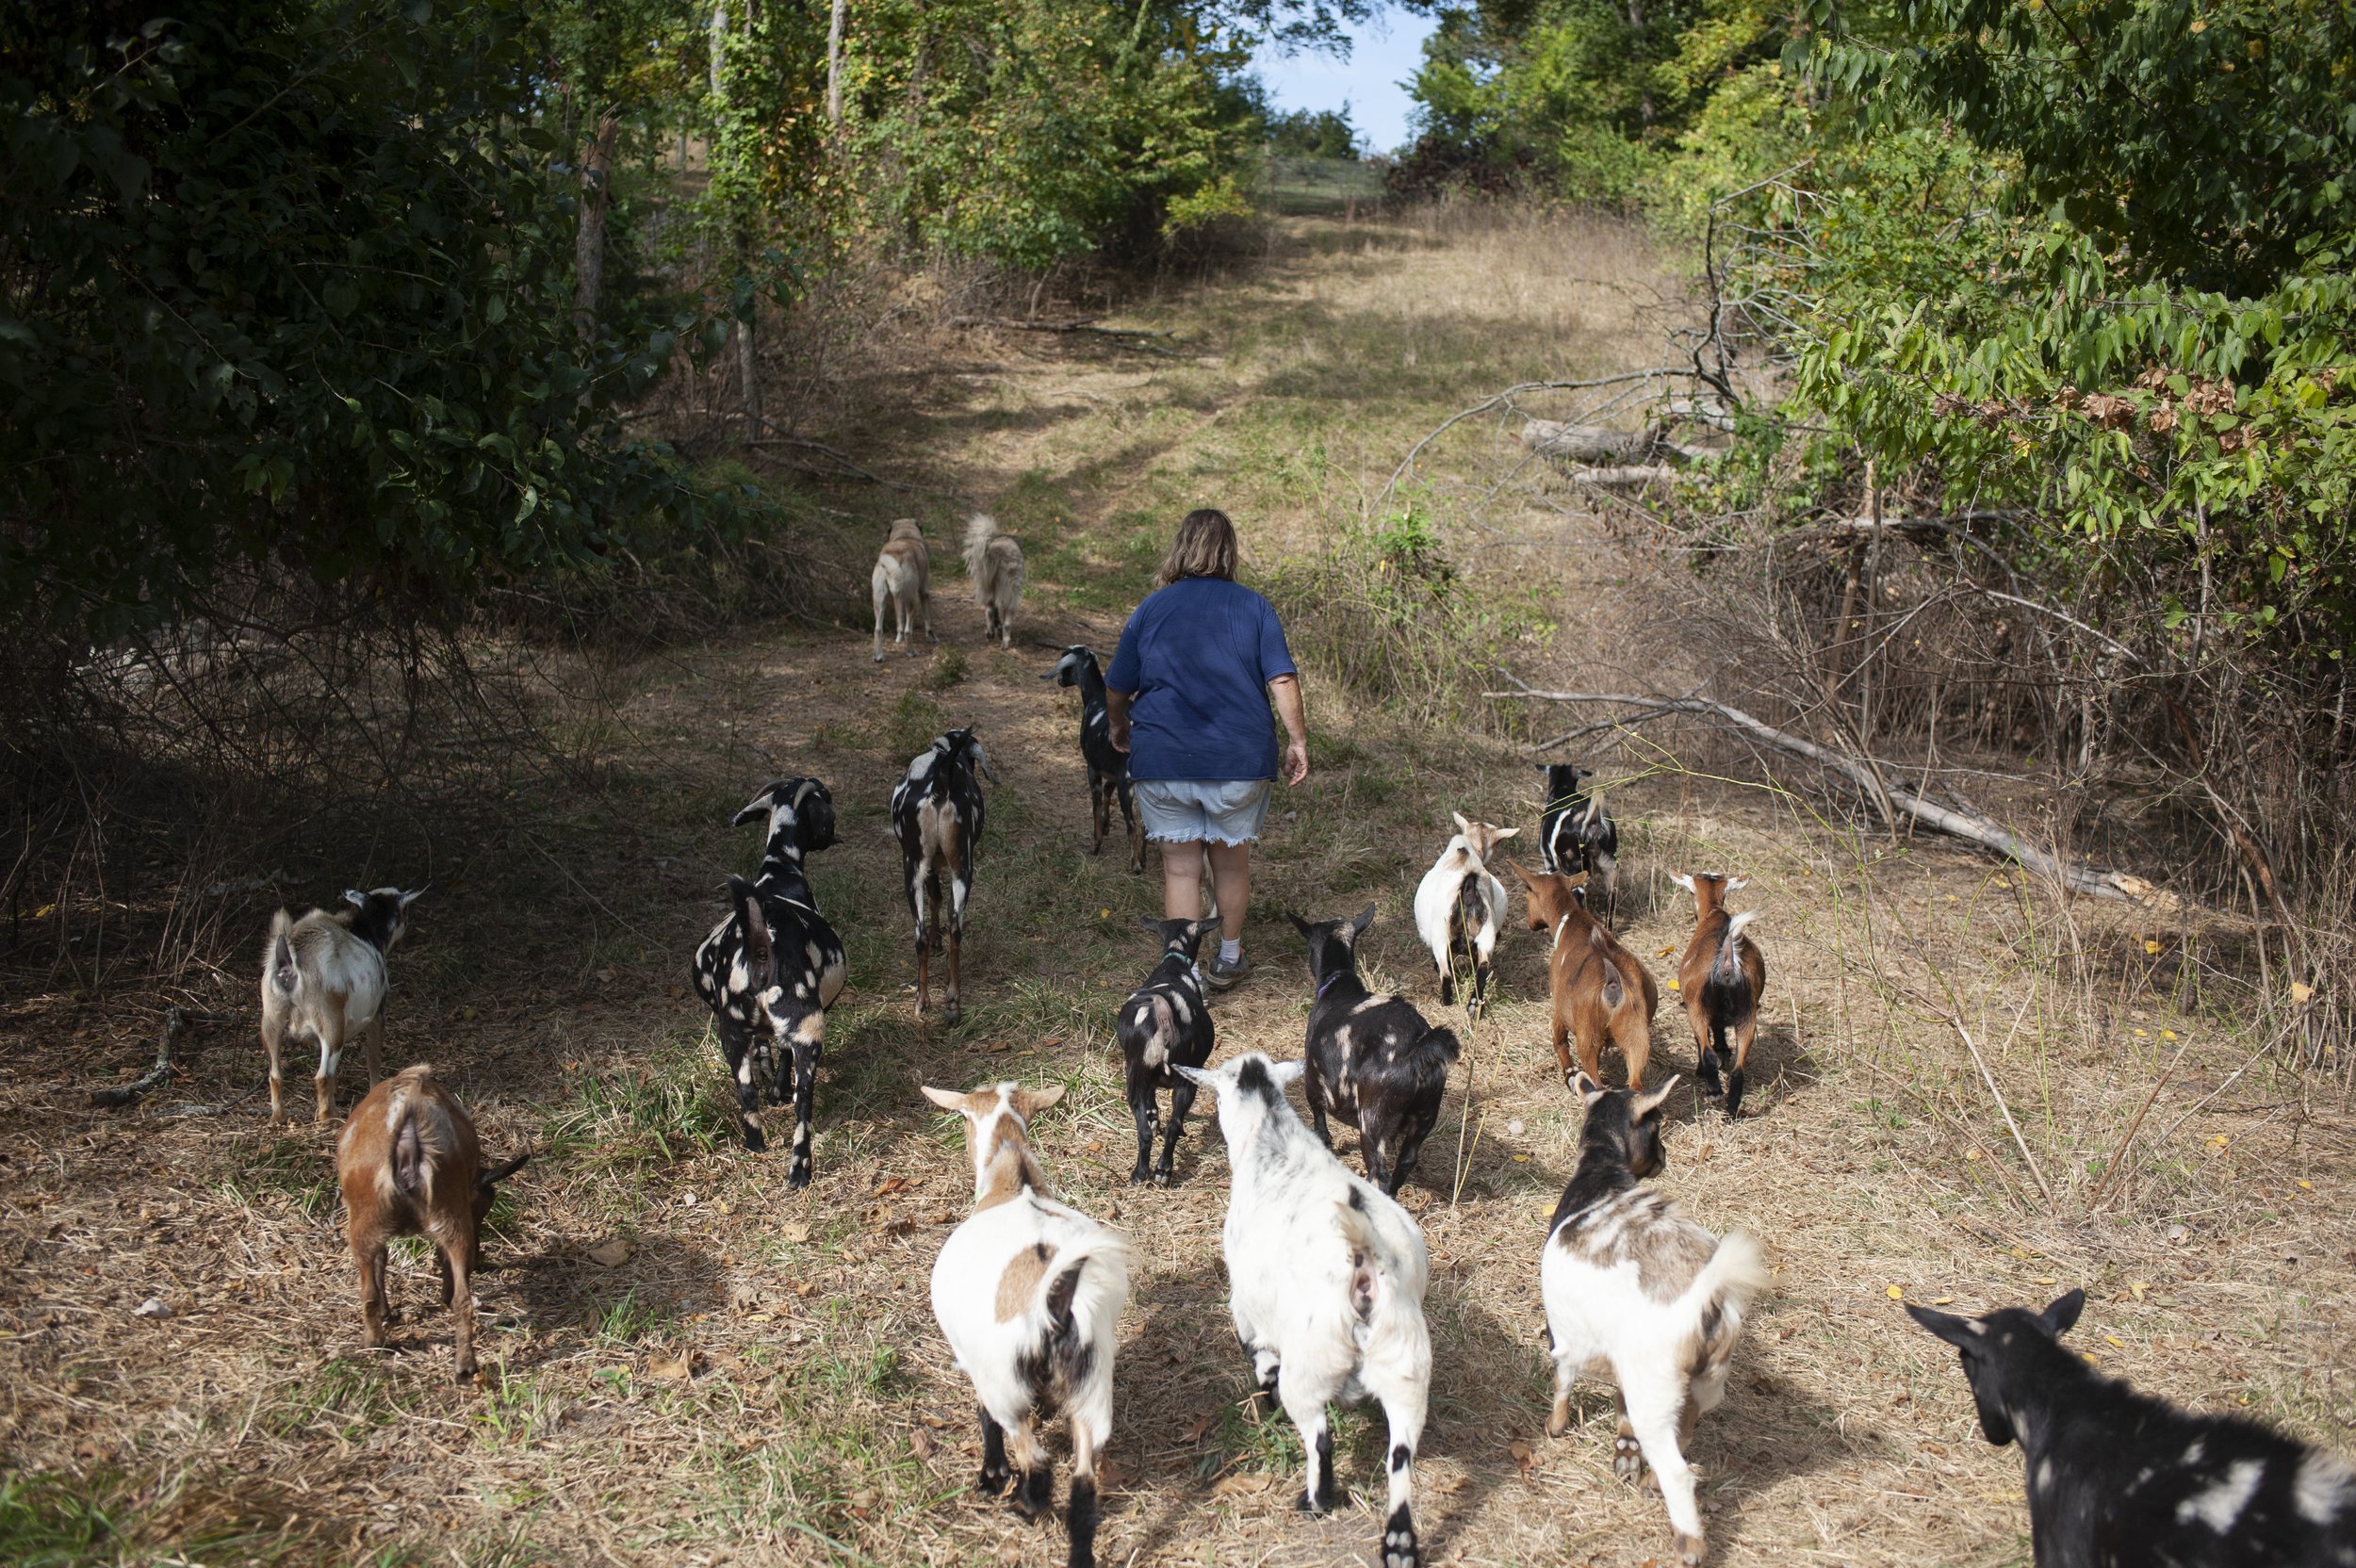  Mary walks with goats on her 45-acre farm.  